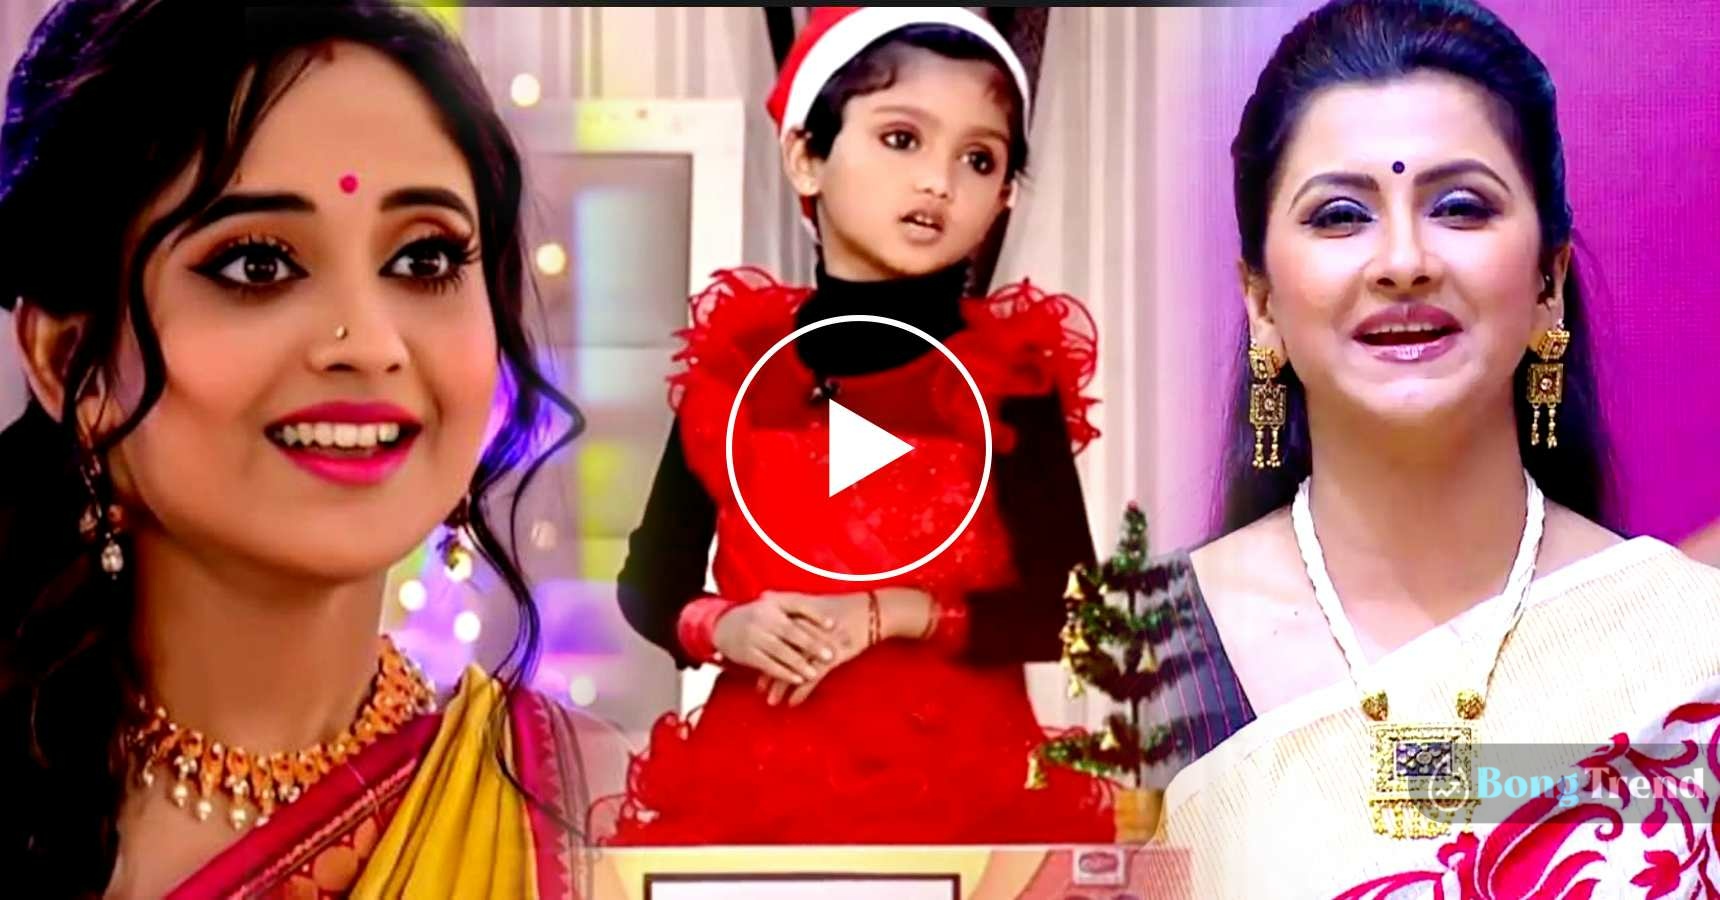 Didi No 1 little soumili wants to be Mithai video goes viral on social media